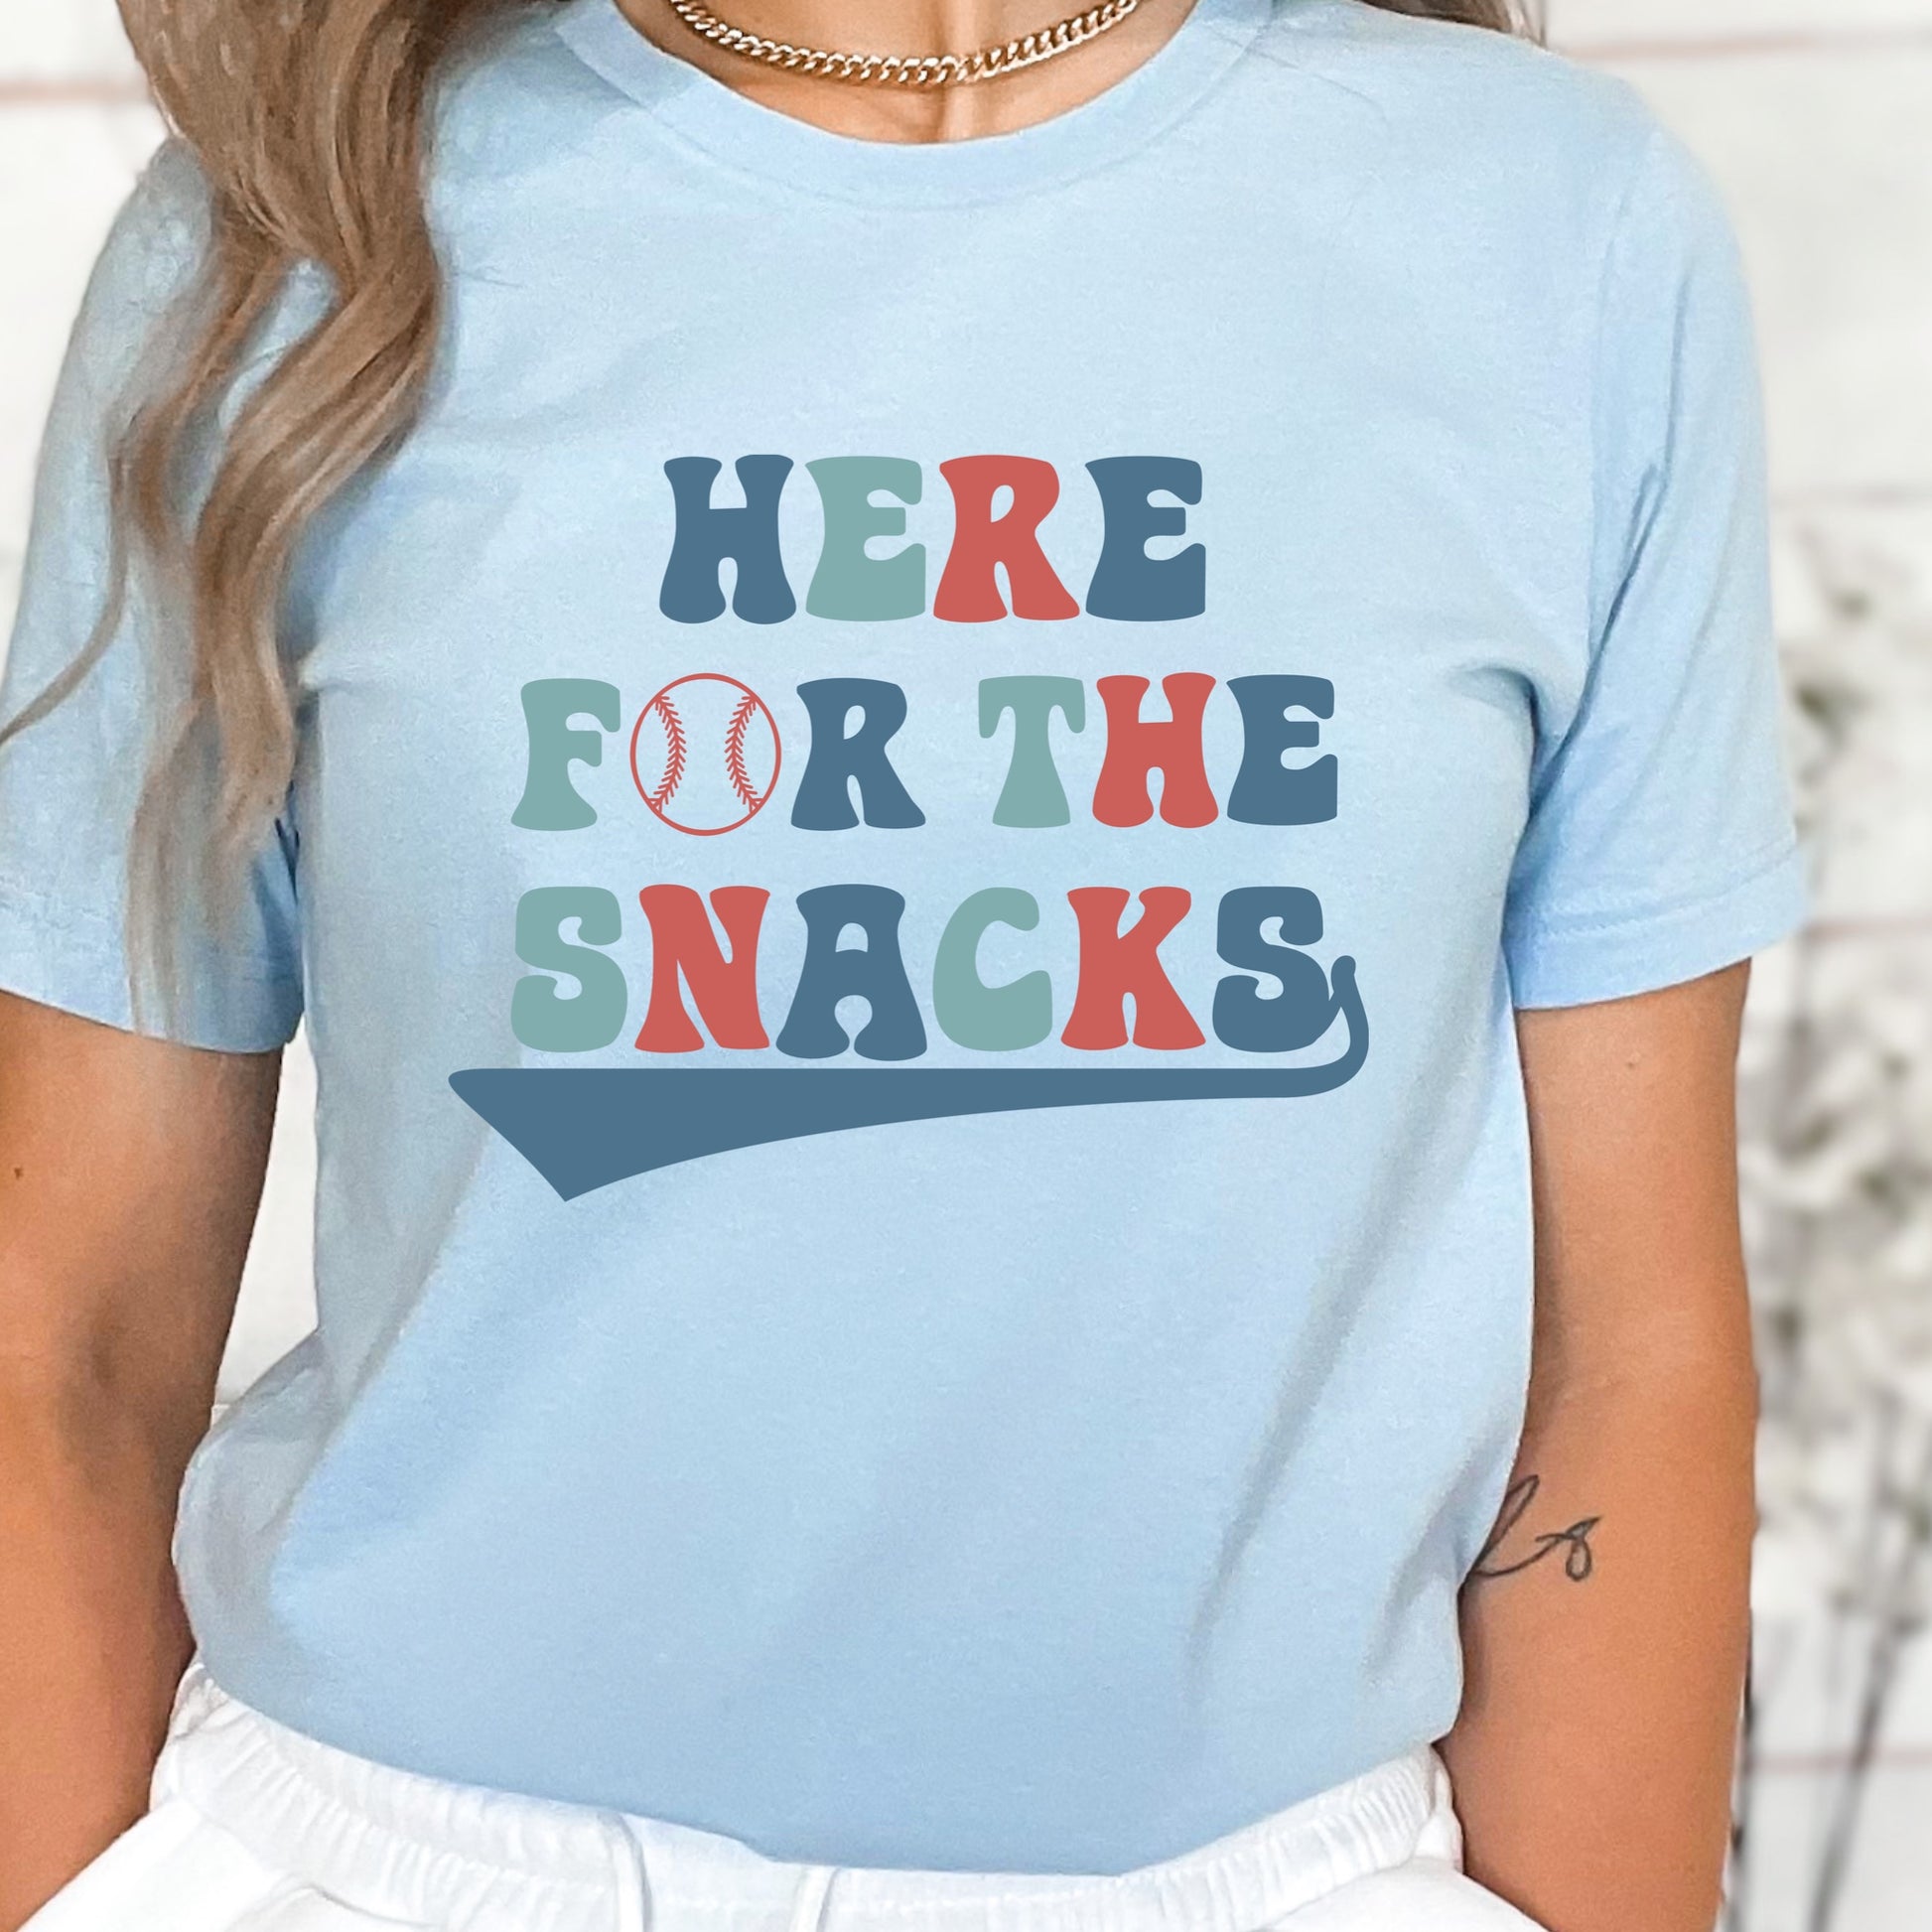 Red and Blue "Here for the snacks" baseball iron on heat transfer.